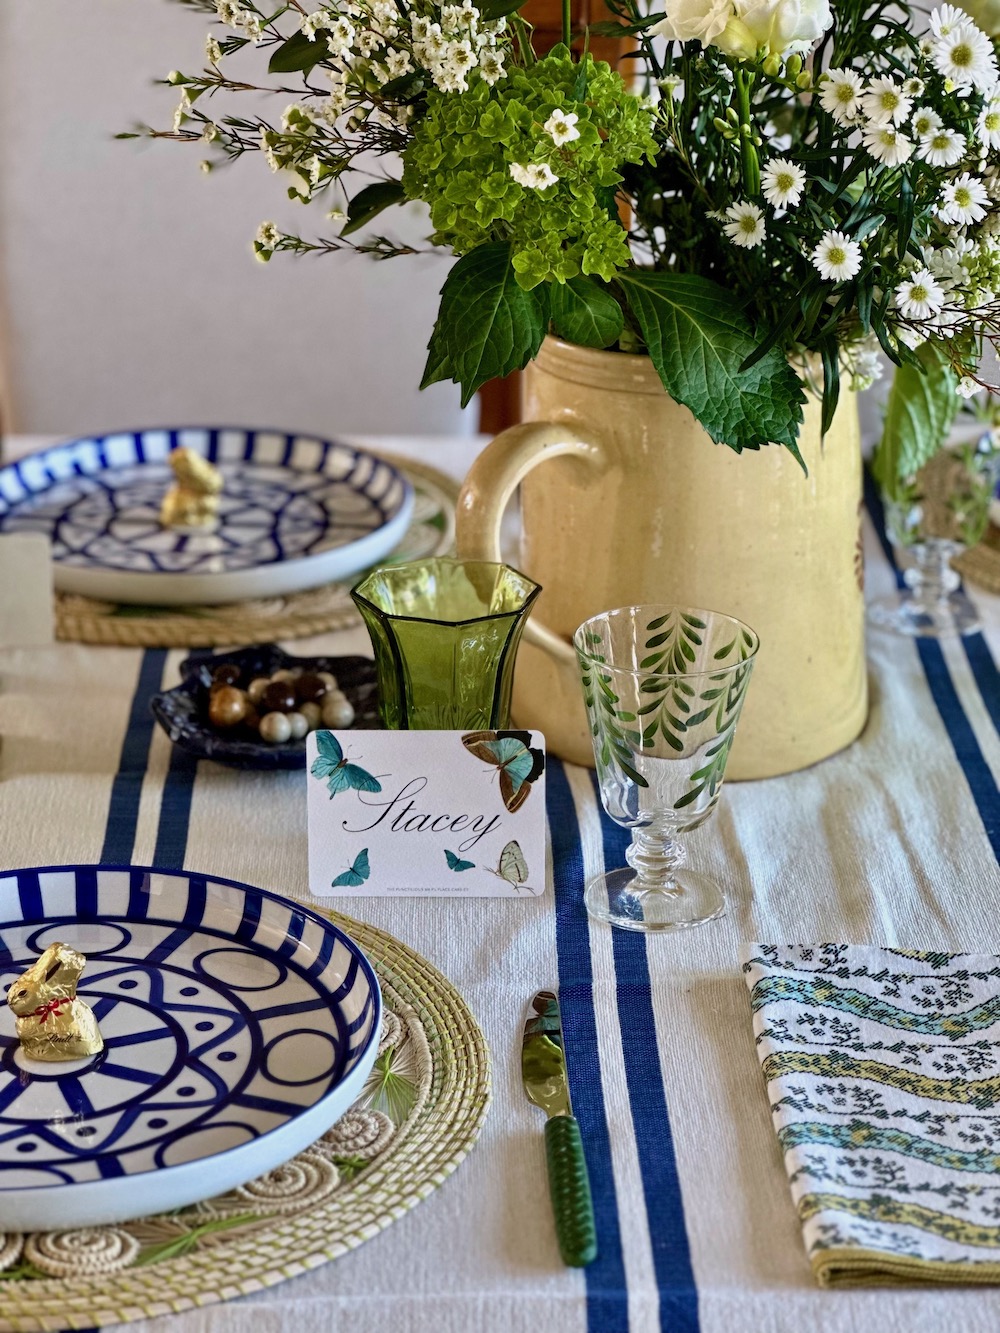 My Easter table - Quintessence